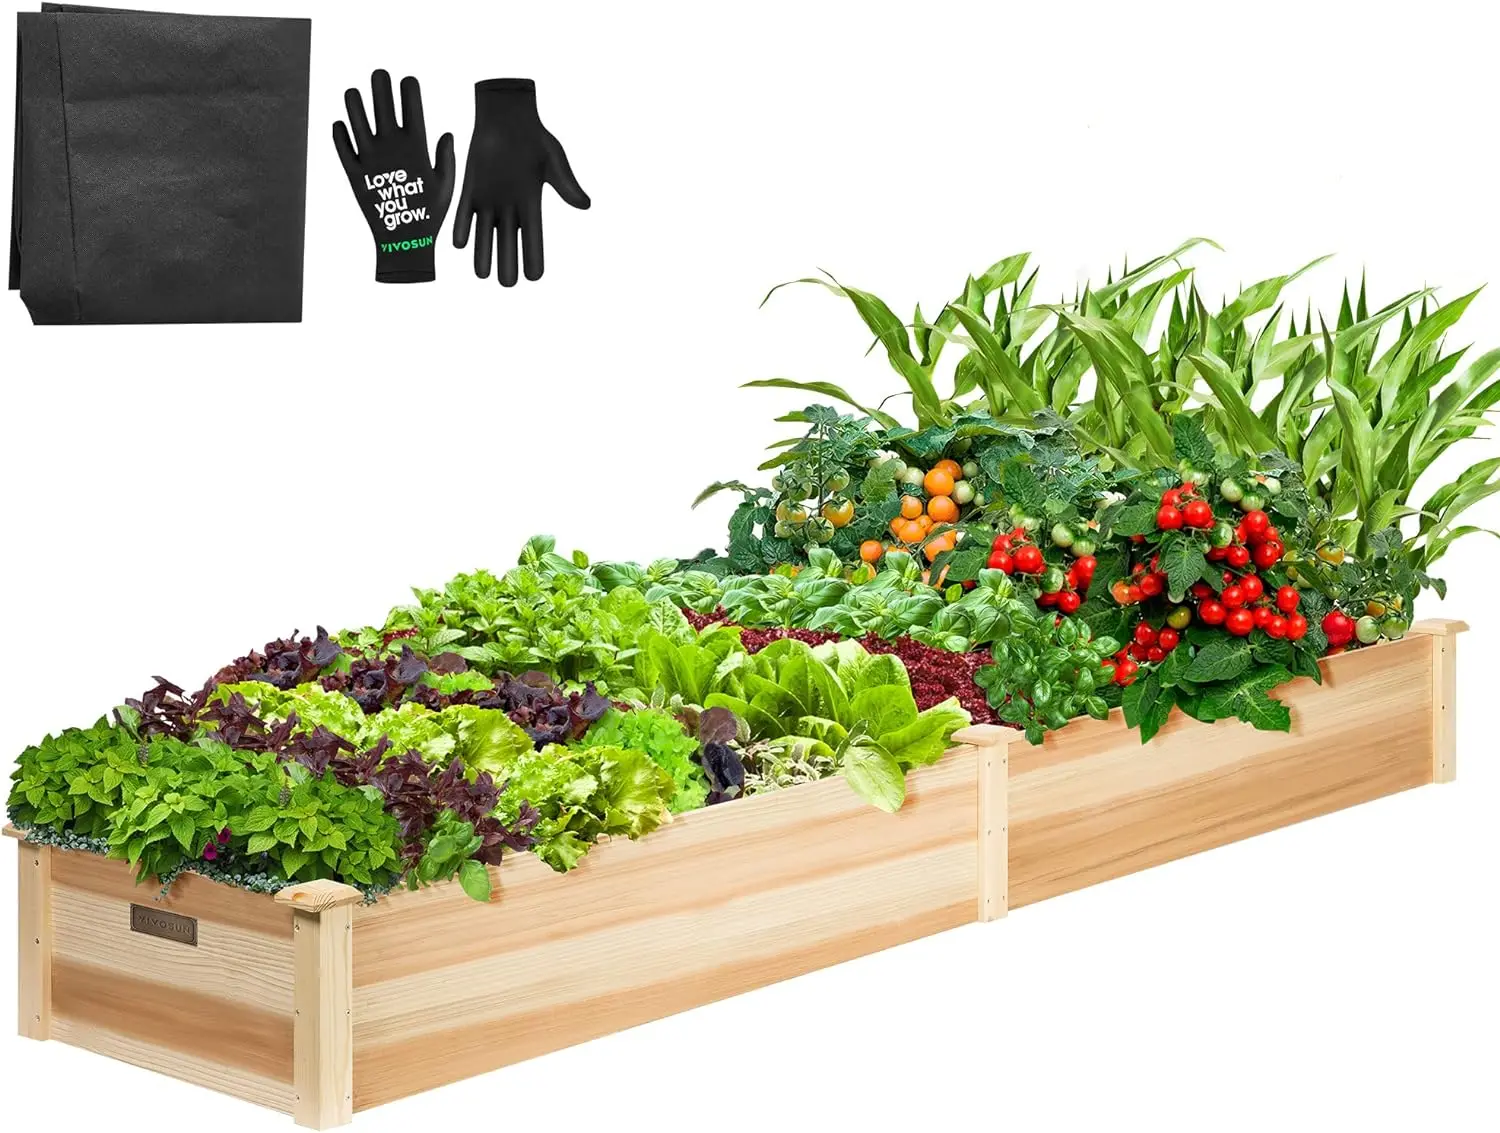 

VIVOSUN 8×2Ft Wooden Raised Garden Bed, 97 x 25 x 11 Inches, Outdoor Wood Planter Box with Gloves and a Liner for Garden,